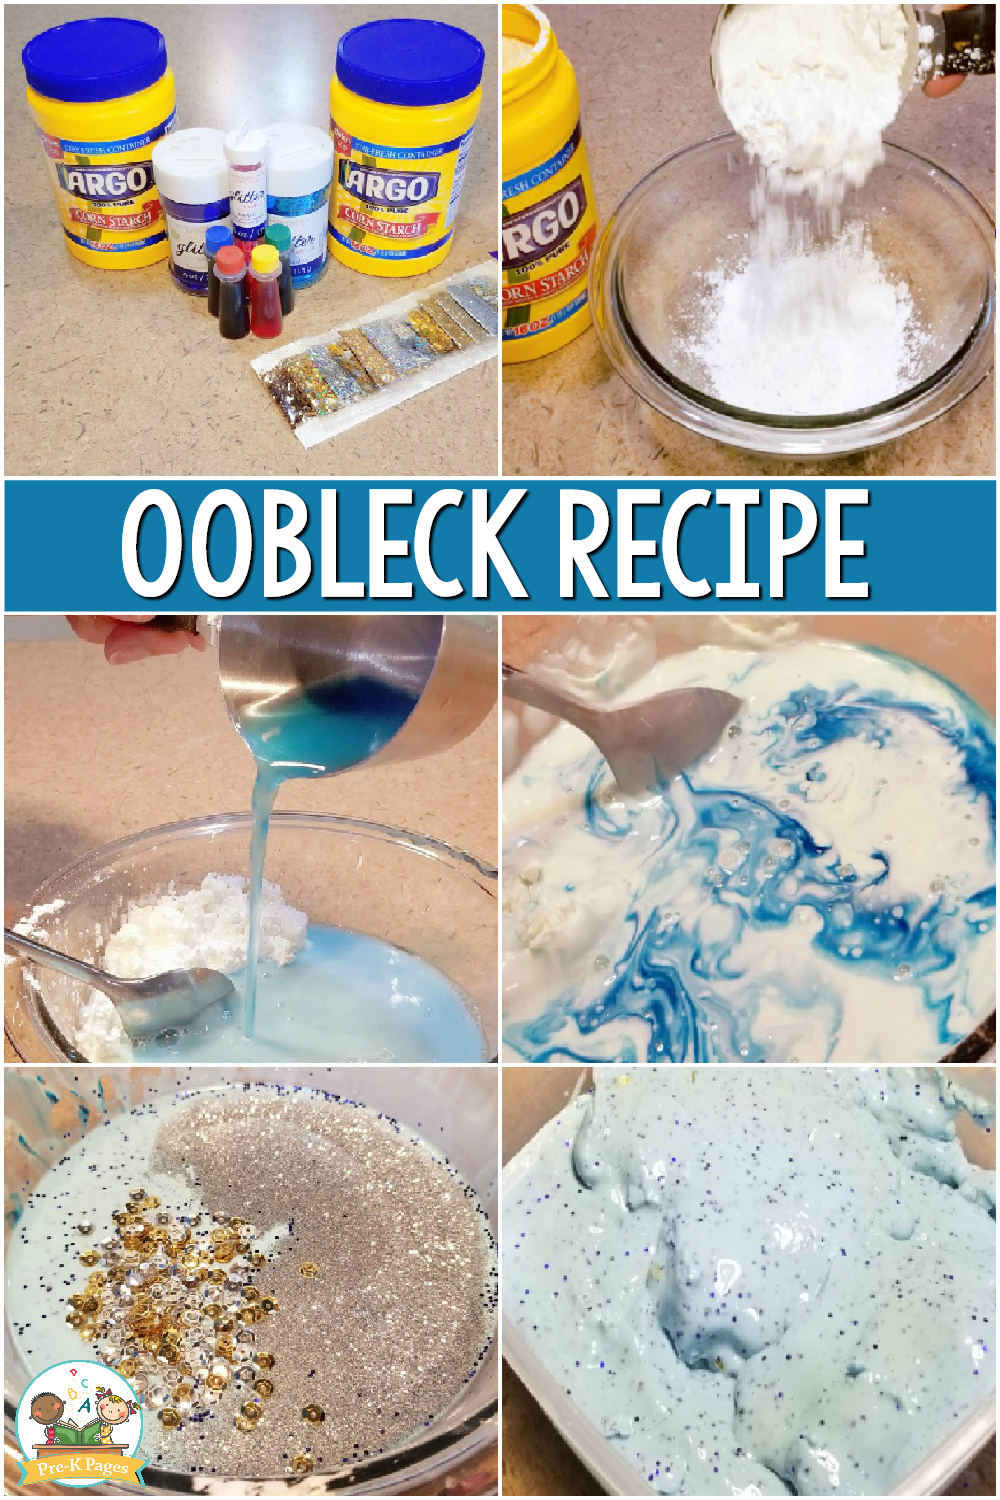 How To Make Oobleck Recipe For